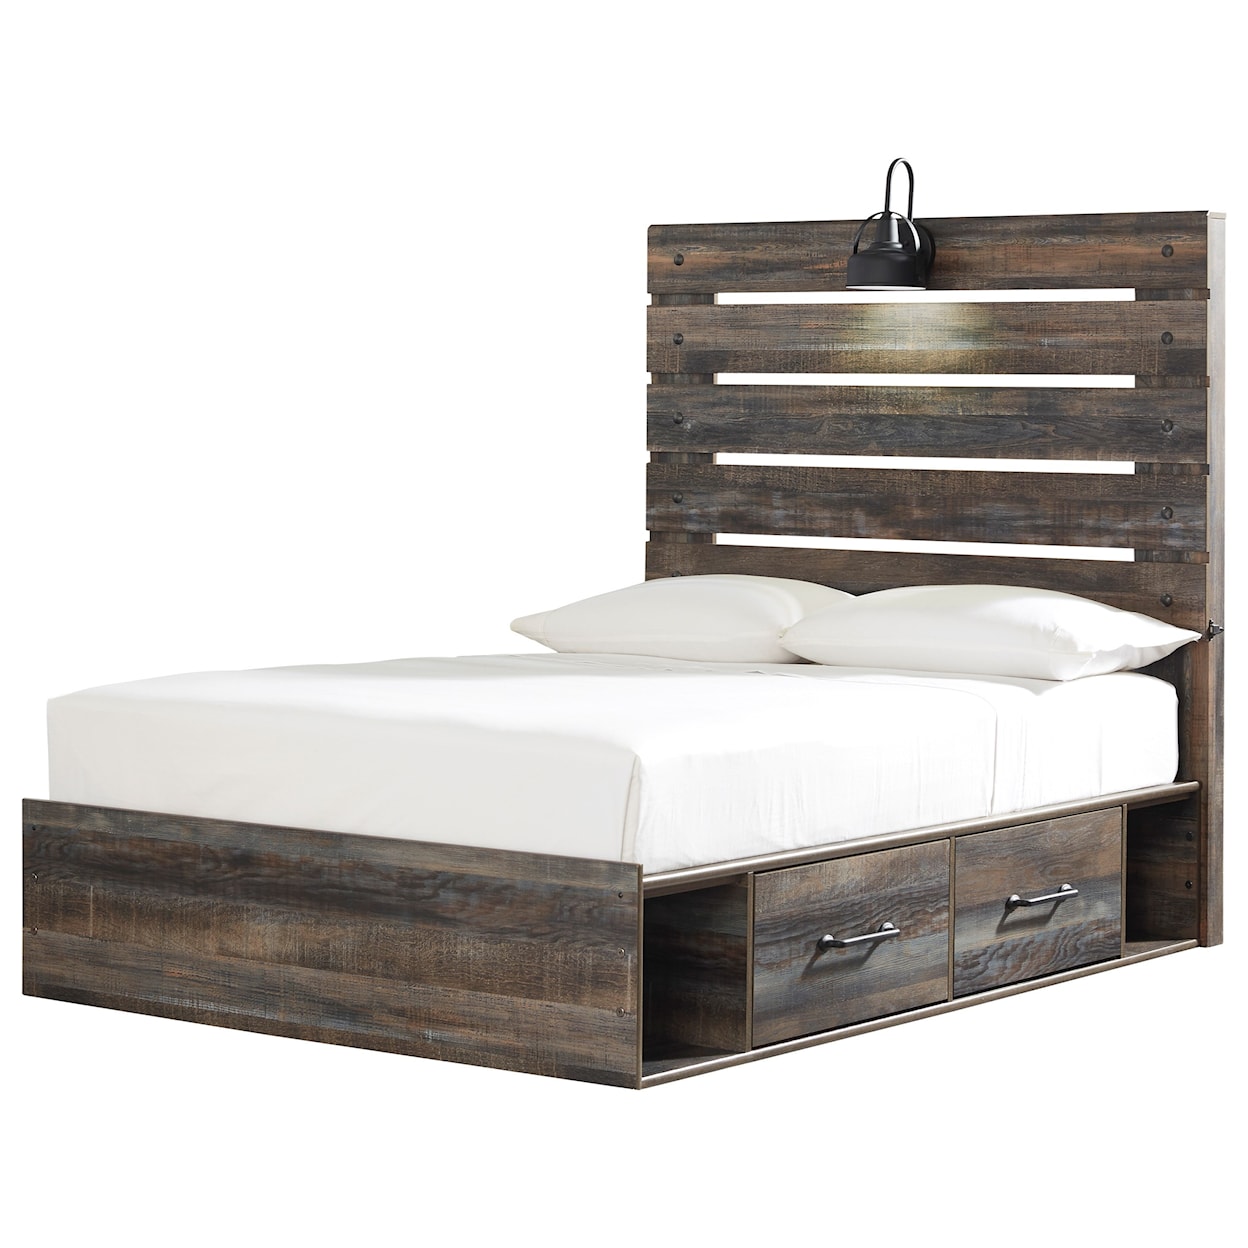 Signature Design Drystan Full Storage Bed with 4 Drawers